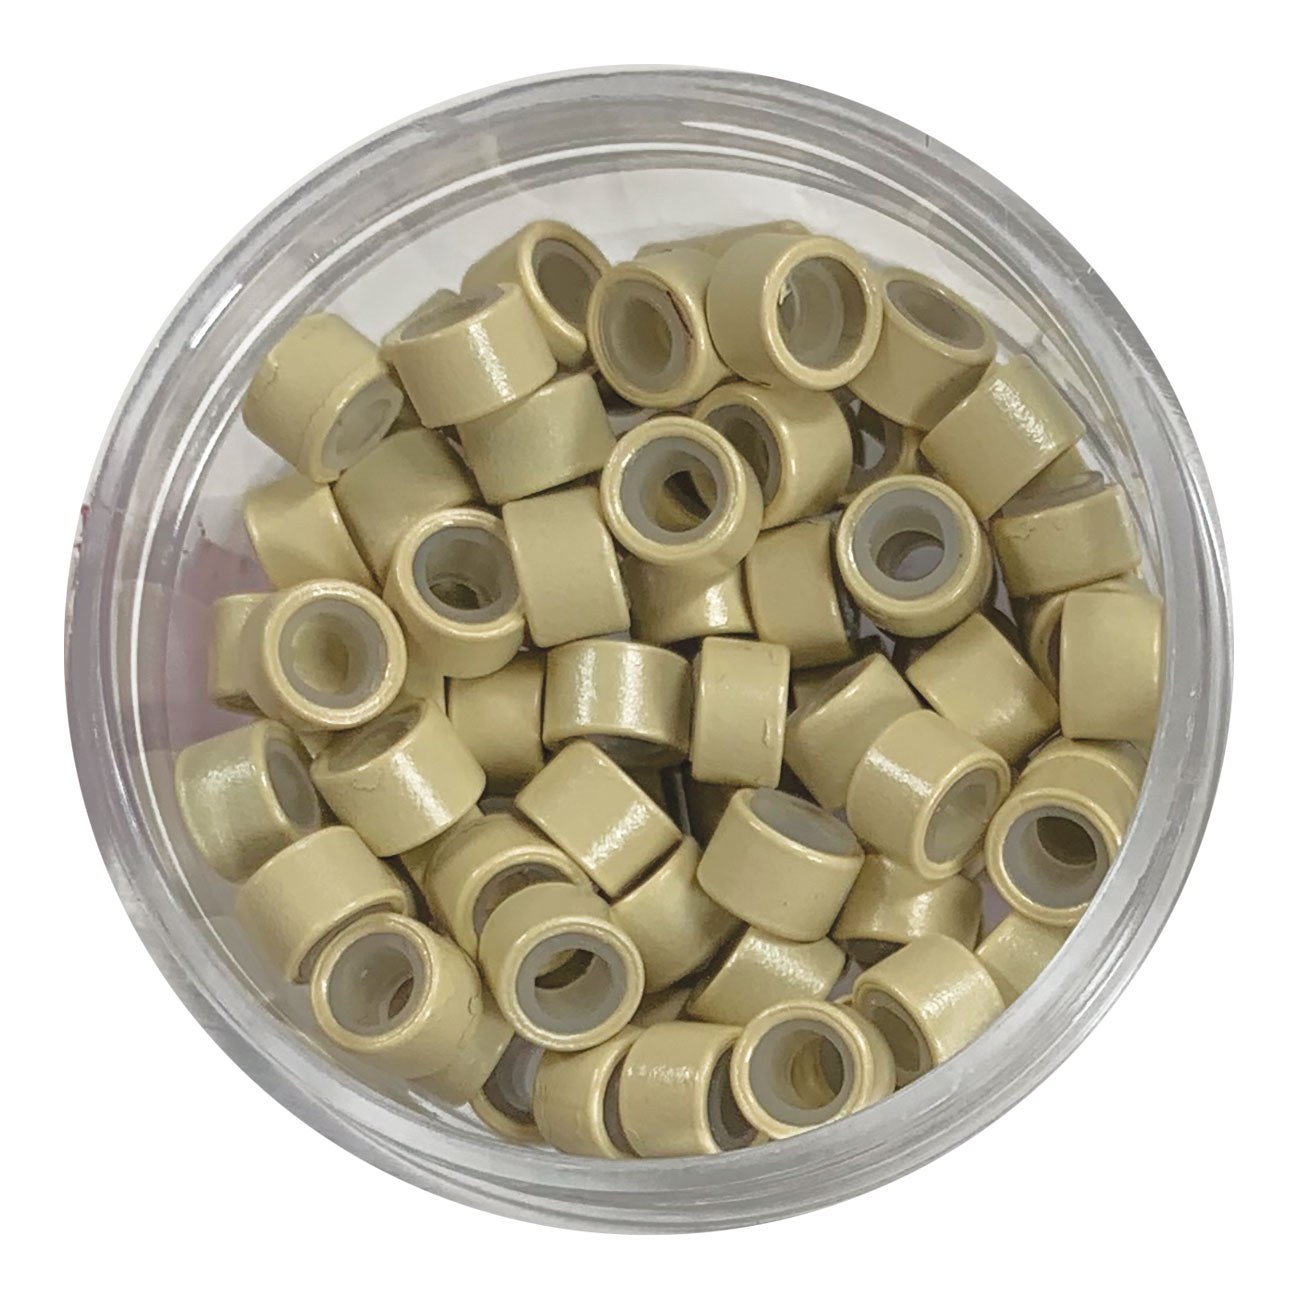 Halo Pro Silicone Beads, Blonde - 100 Pack